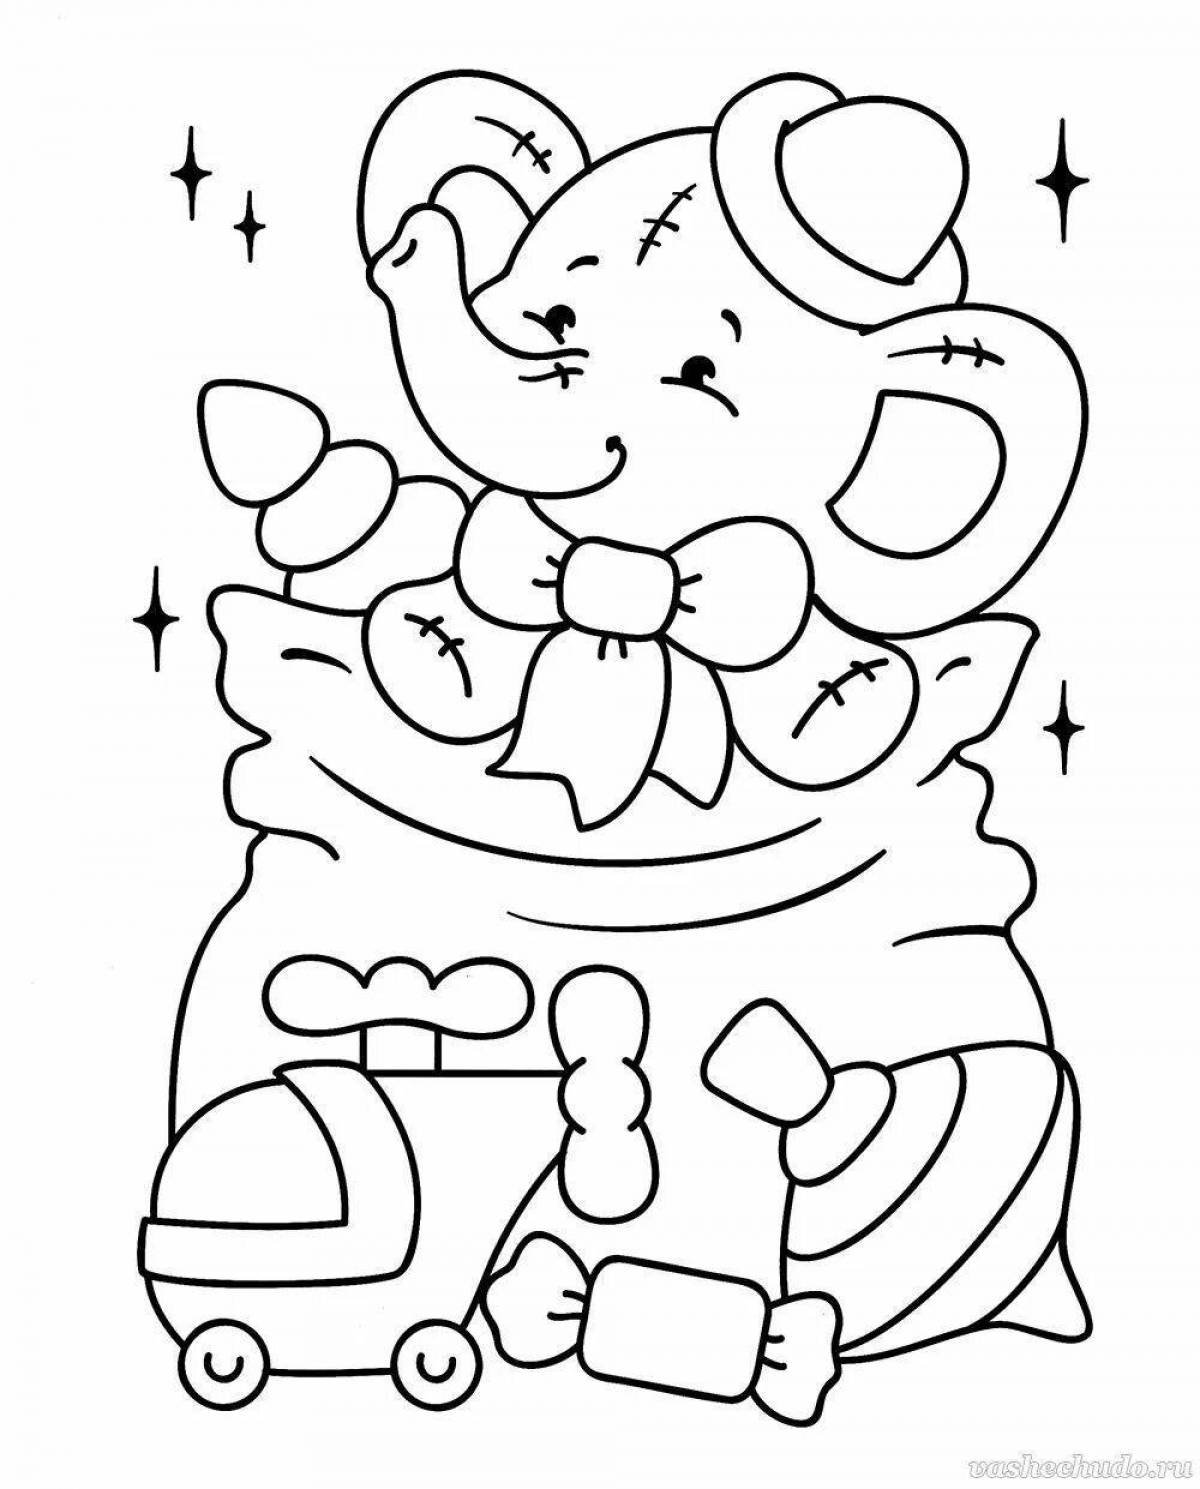 Joyful Christmas coloring book for 5 year olds